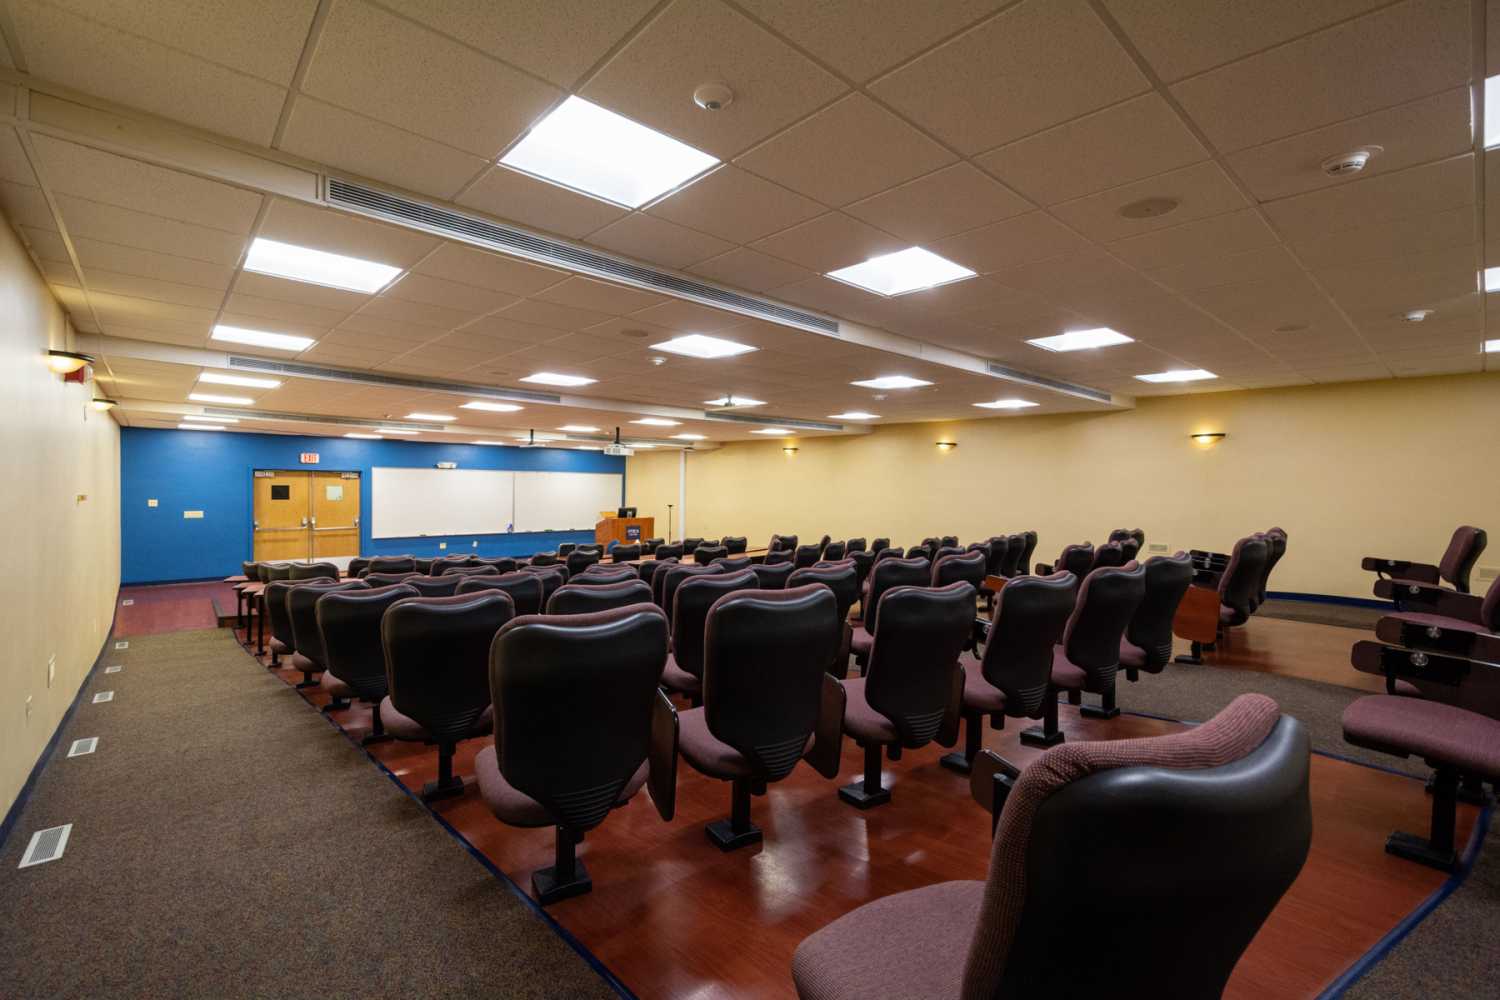 The Donahue Auditorium lecture hall